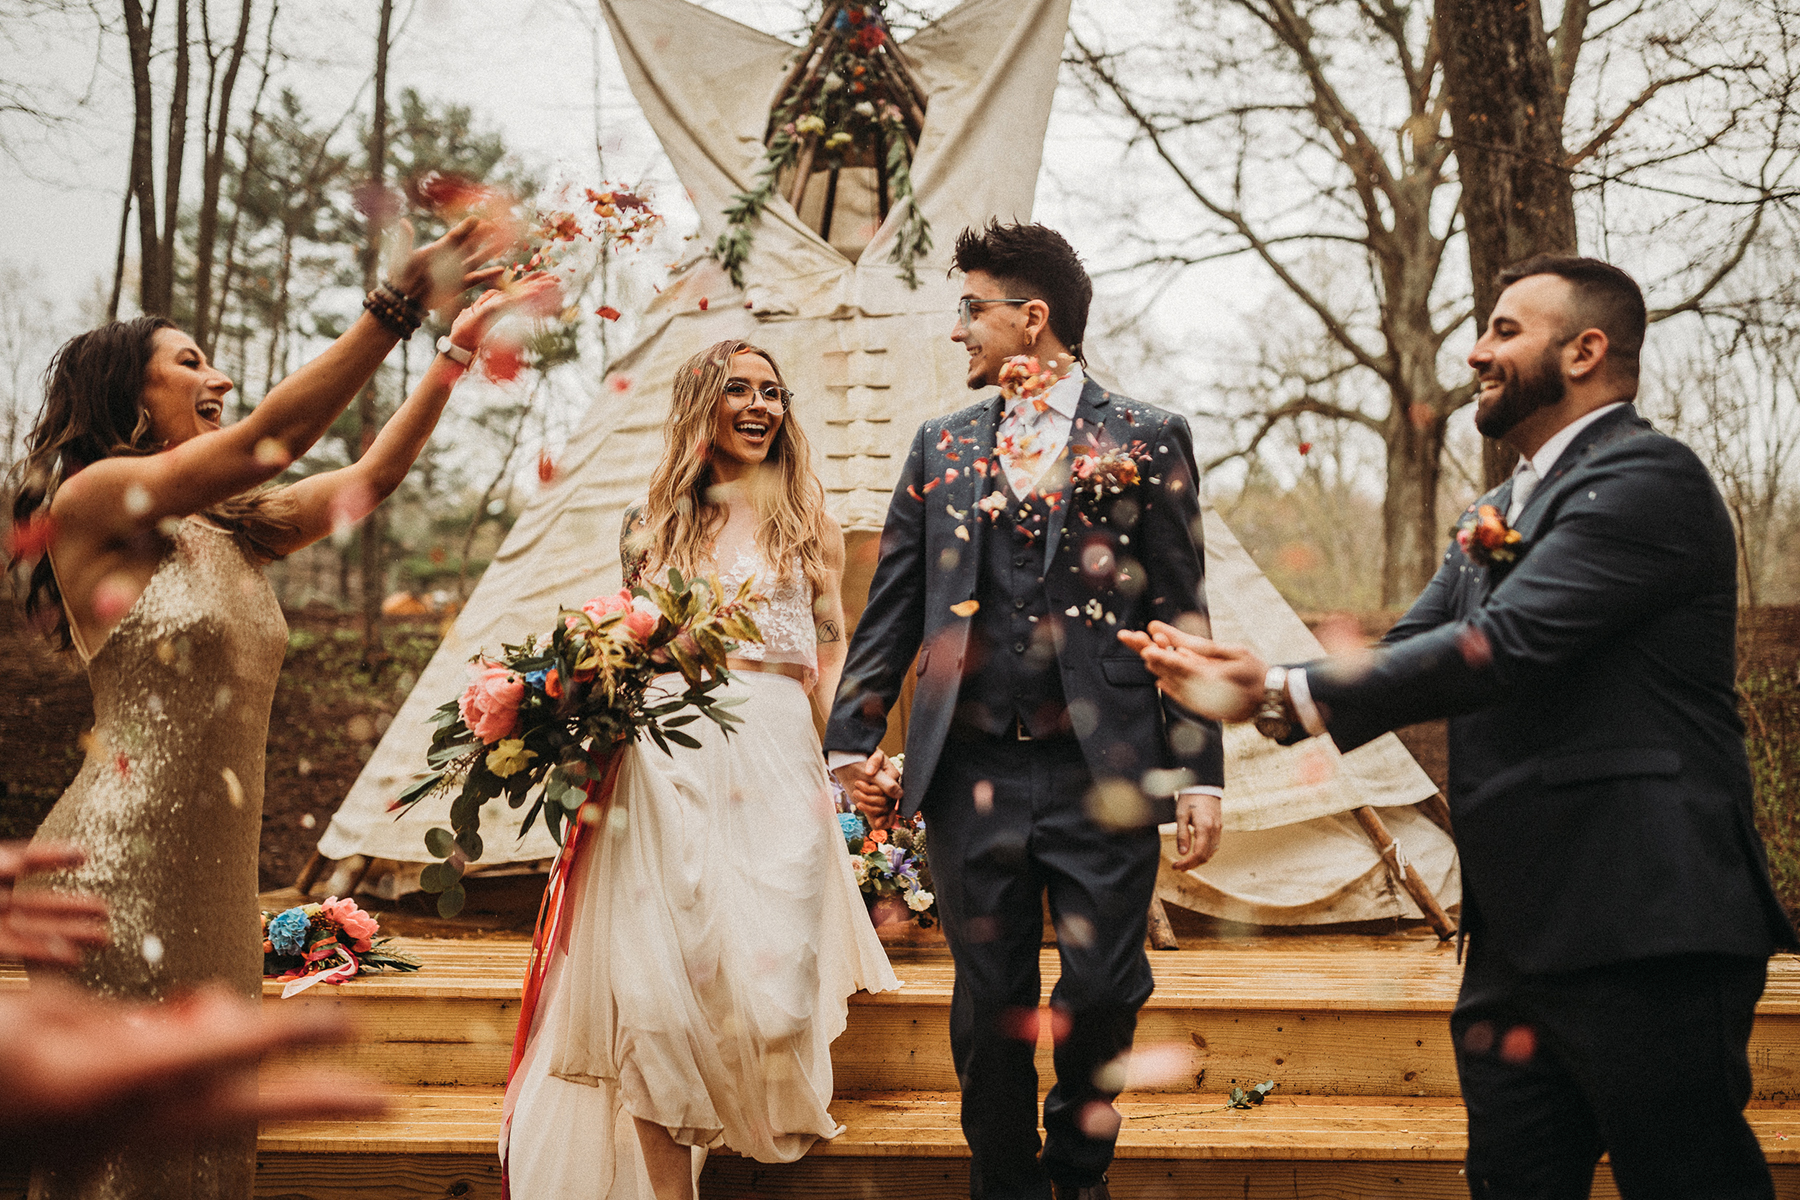 California Boho Meets Connecticut Rustic in This Wedding Inspiration